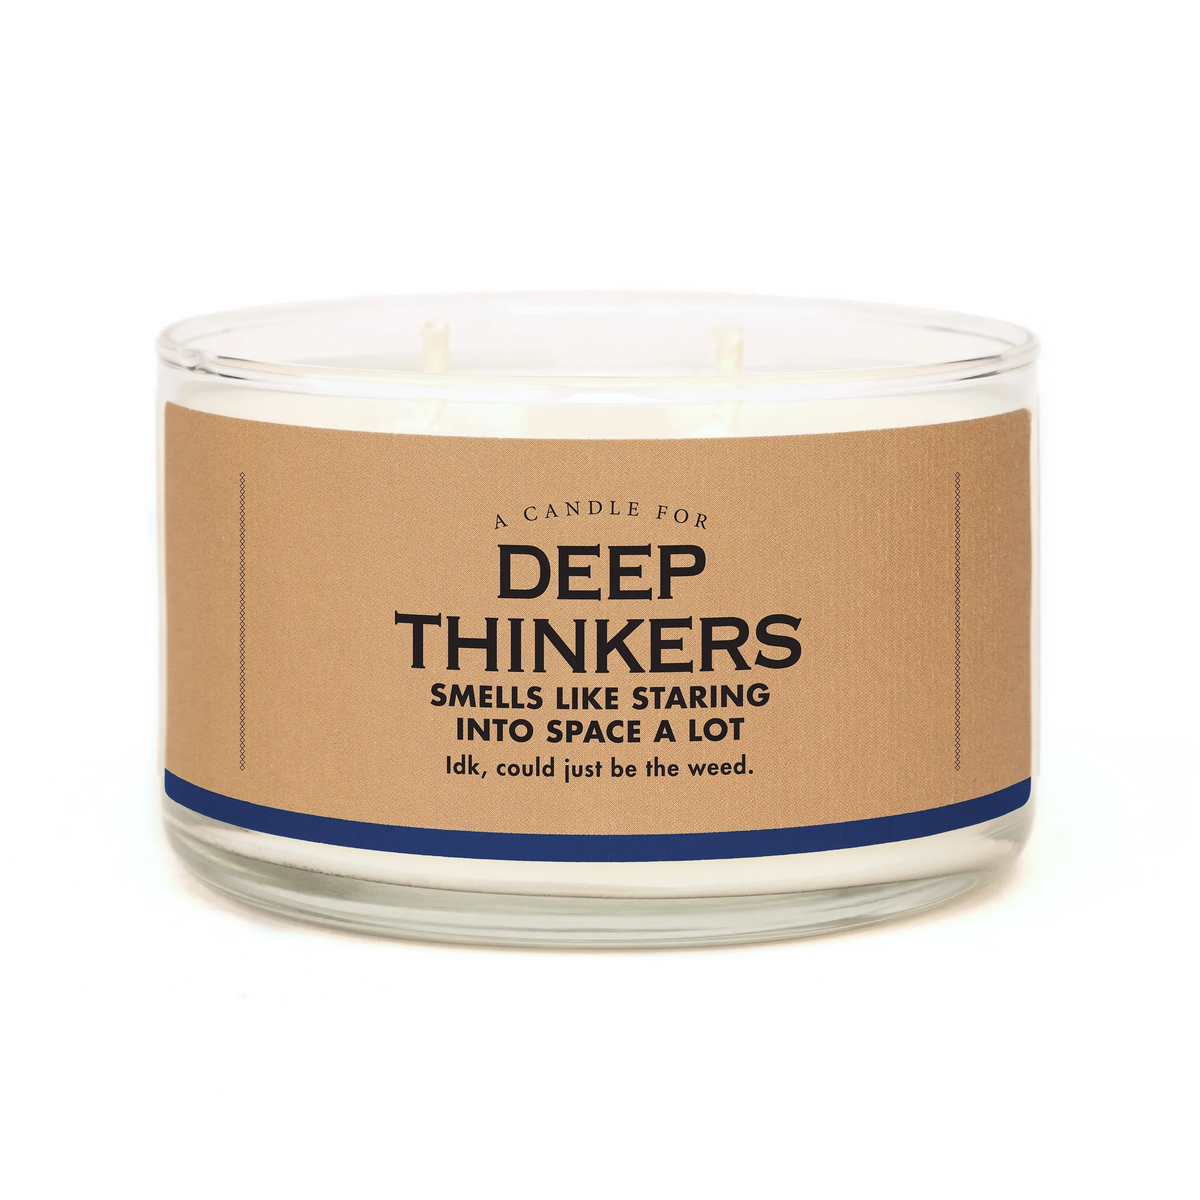 A Candle for Deep Thinkers - 10oz - Heart of the Home PA